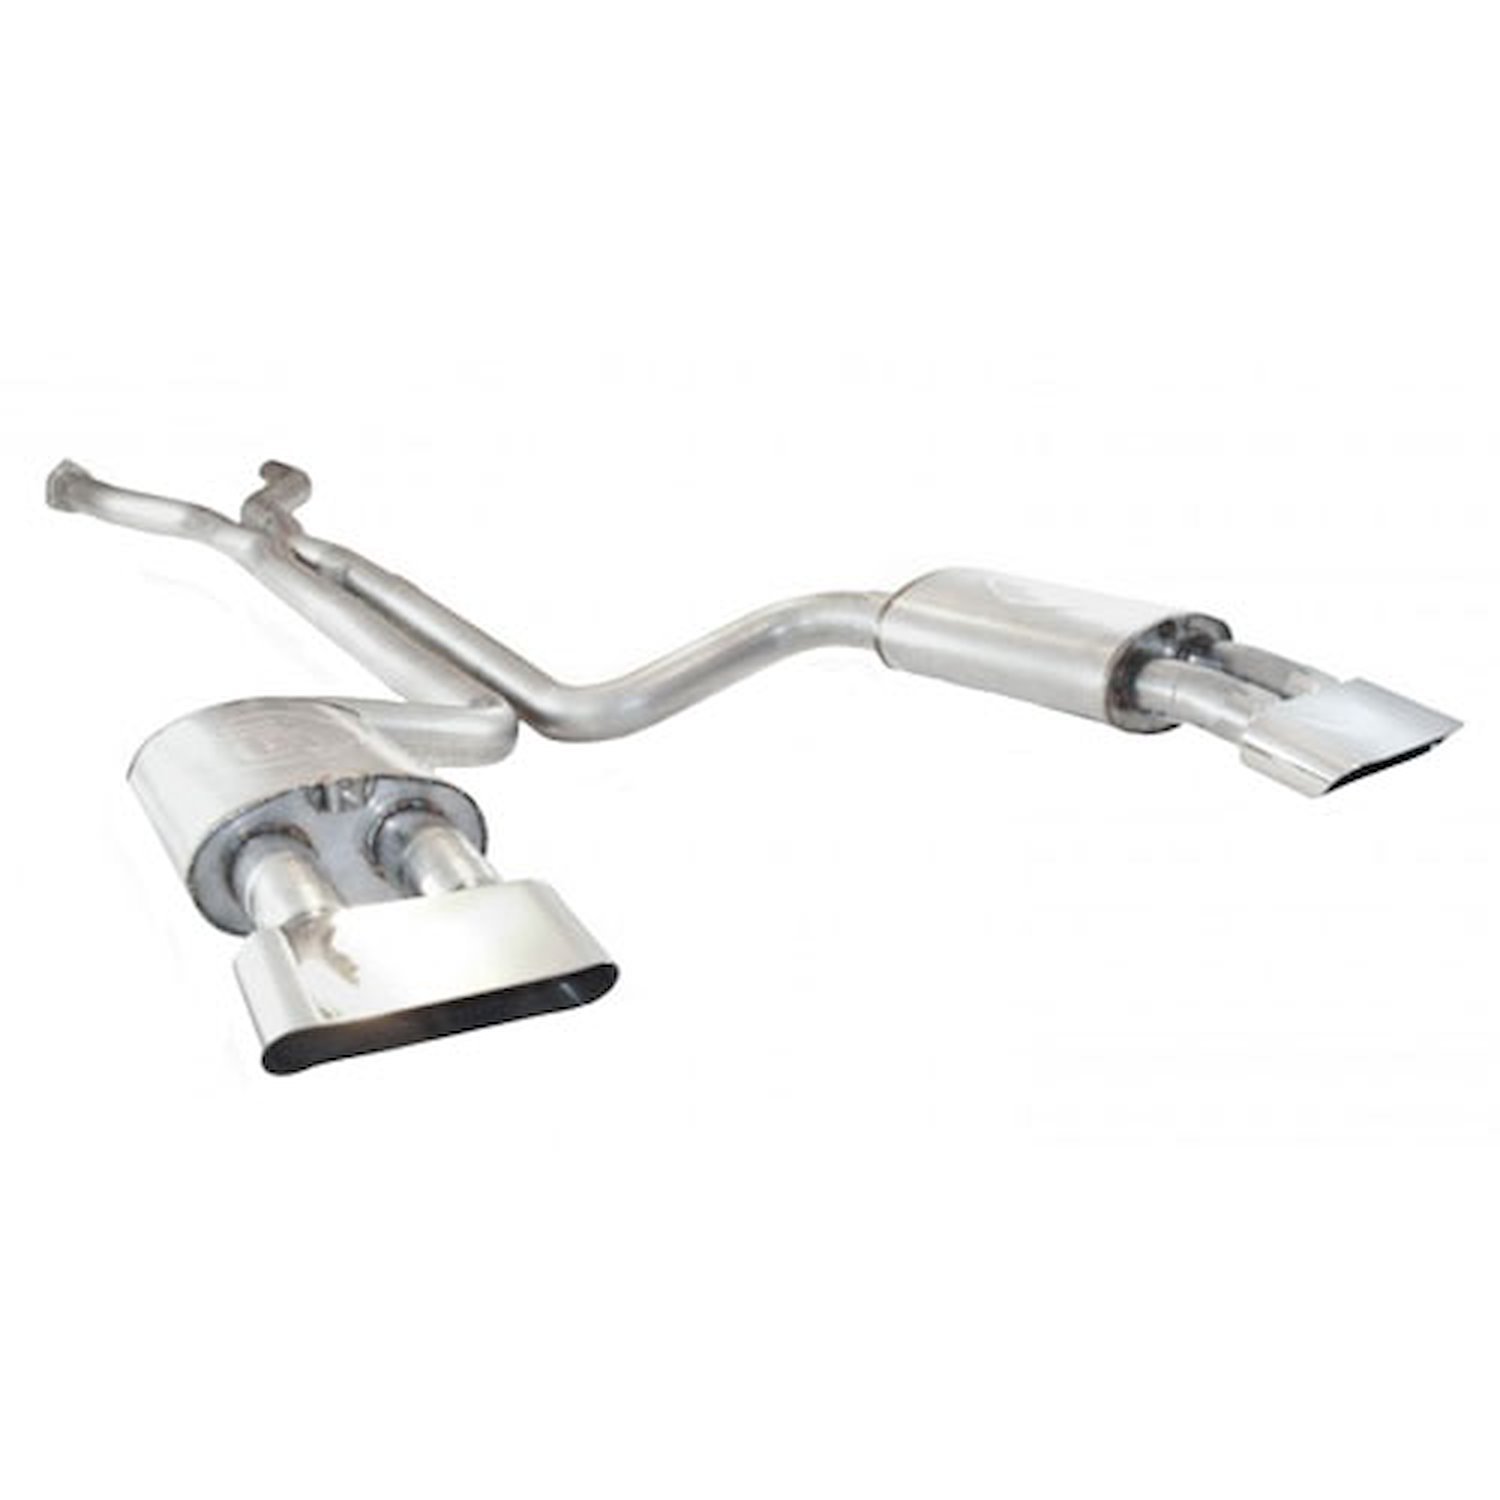 1990-1995ZR1 3 aggressive sounding exhaust system to fit Stainless Works full length headers. Includ